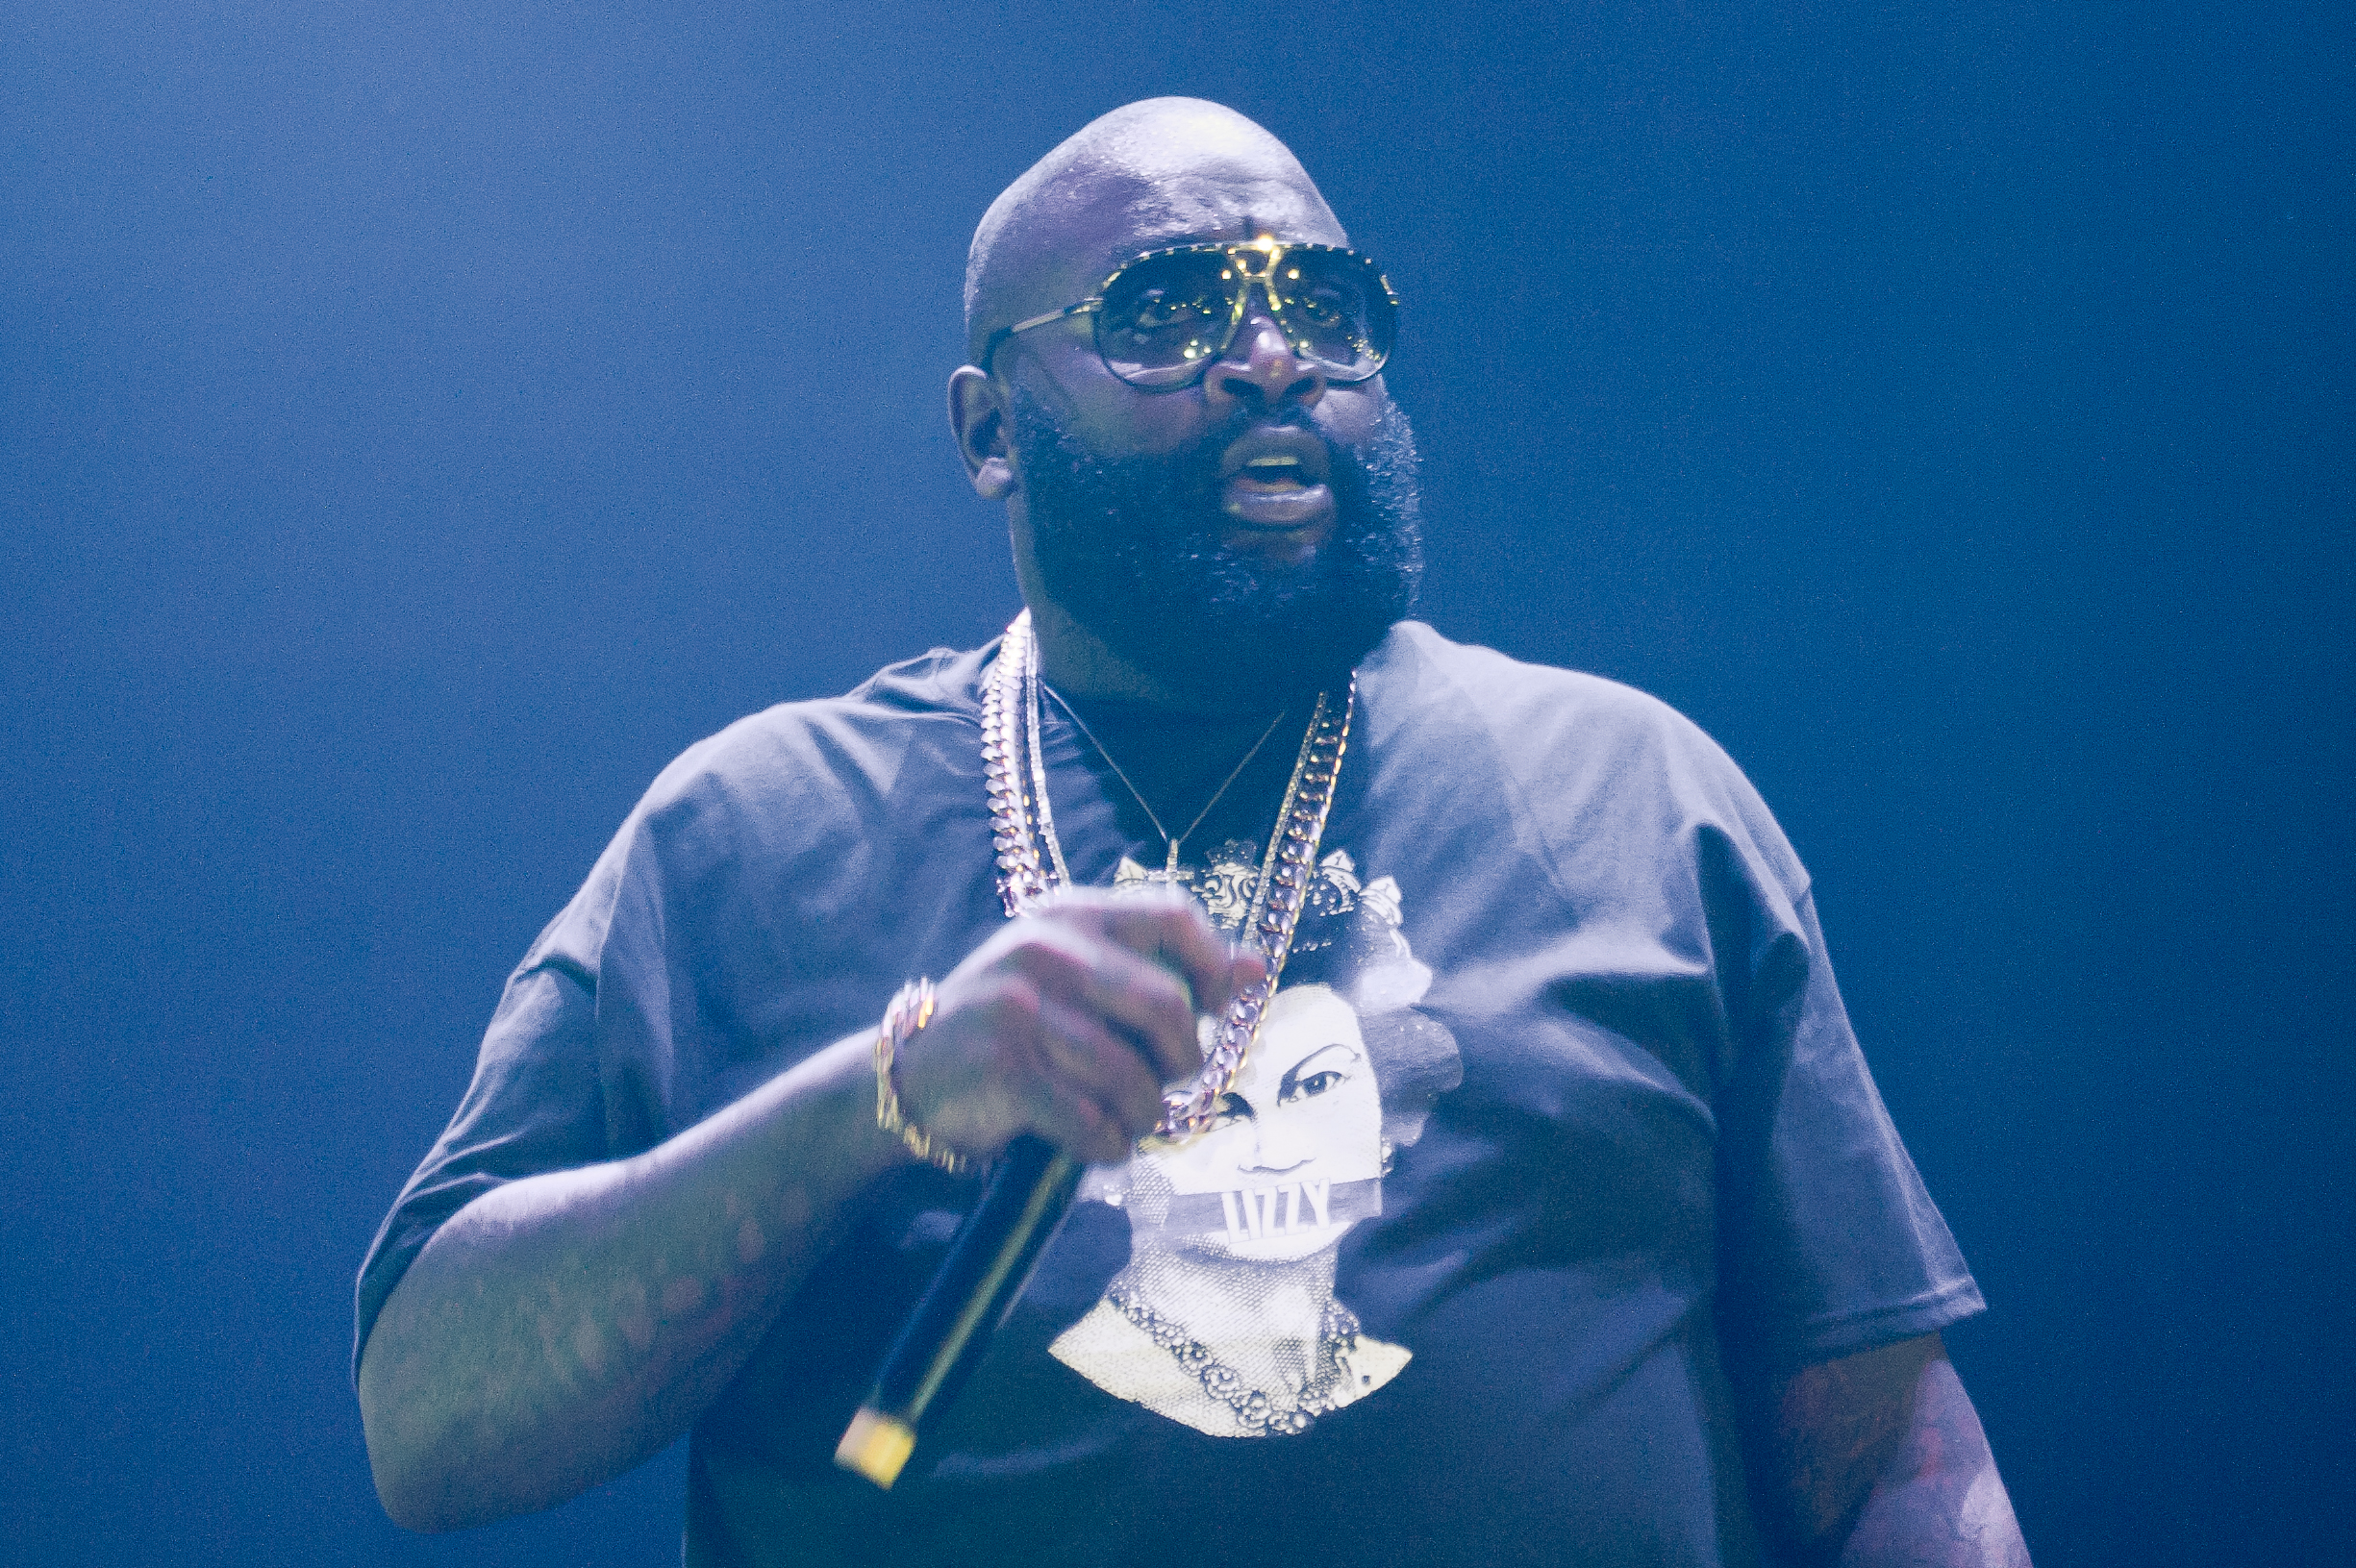 Rick Ross performs on stage at The Roundhouse on May 18, 2014 in London, United Kingdom. (Joseph Okpako--Redferns via Getty Images)